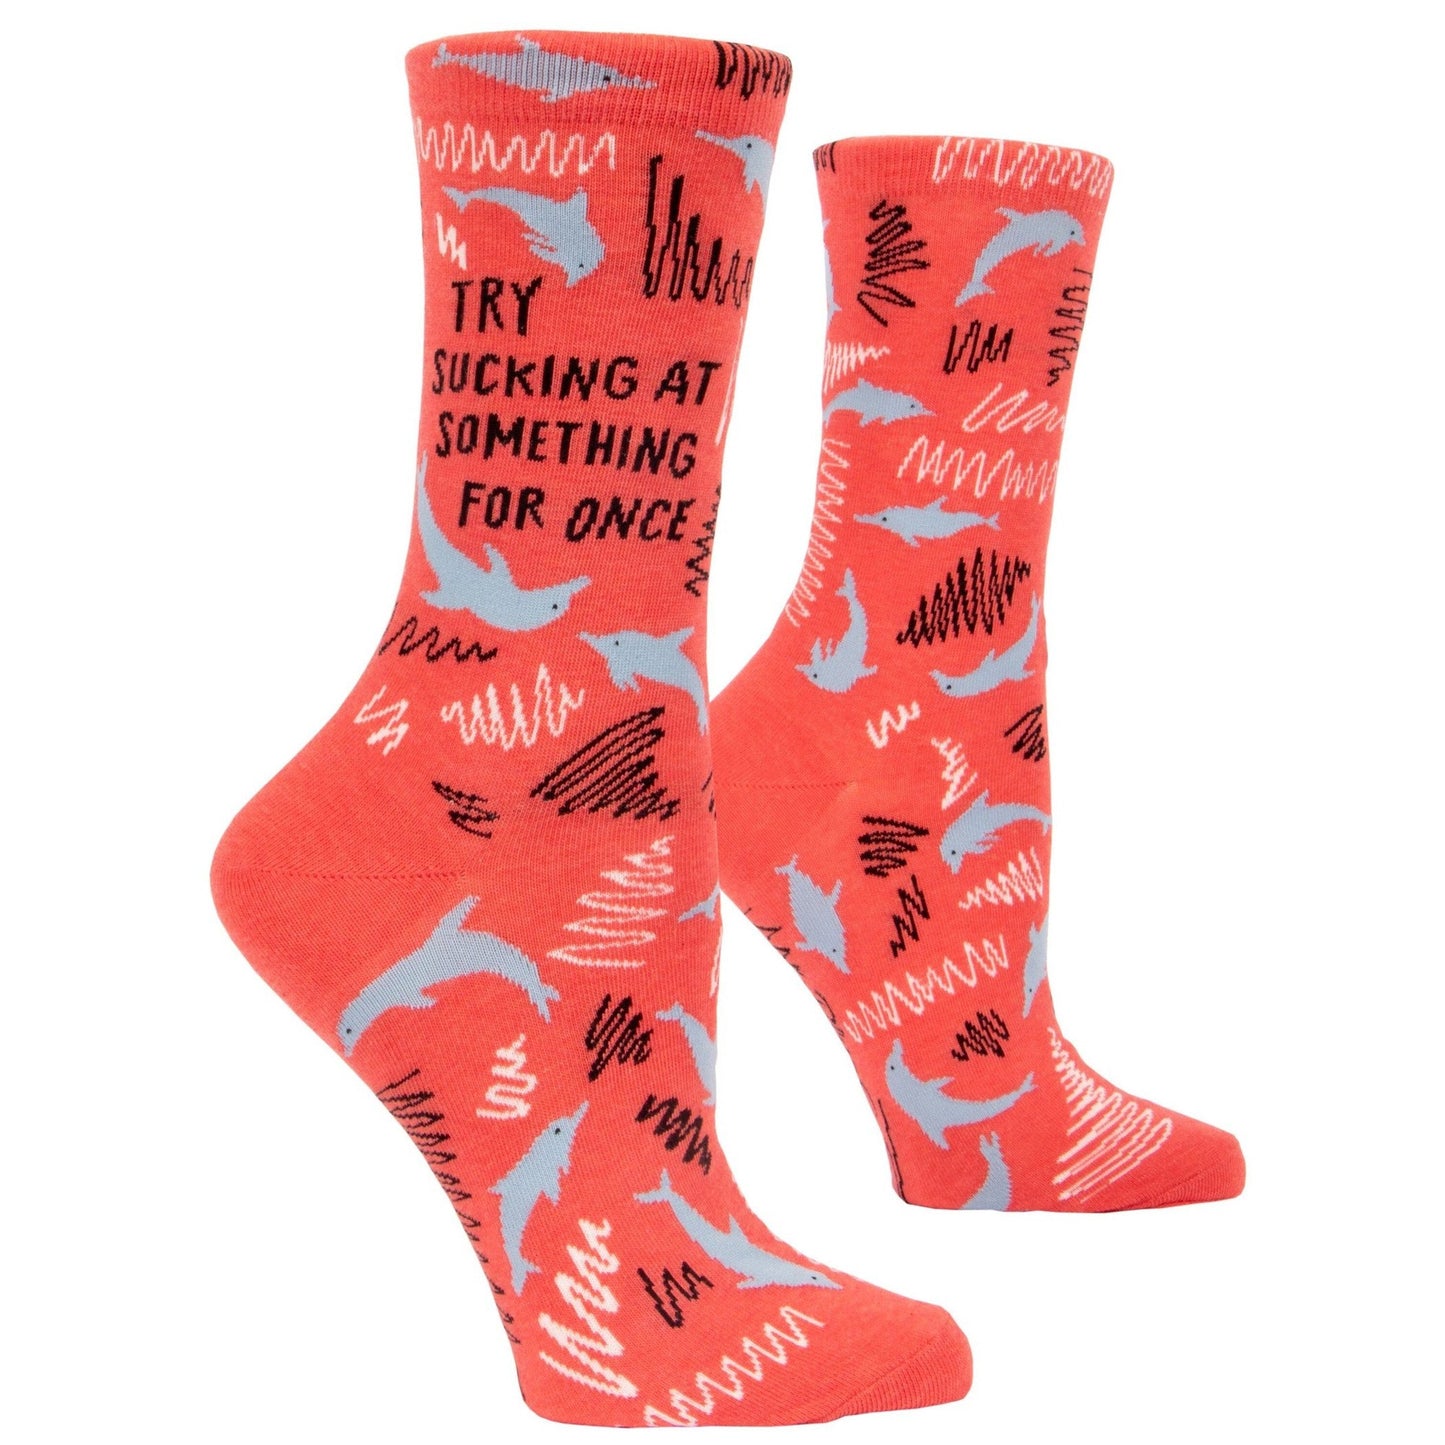 Try Sucking At Something For Once Women's Crew Dress Socks